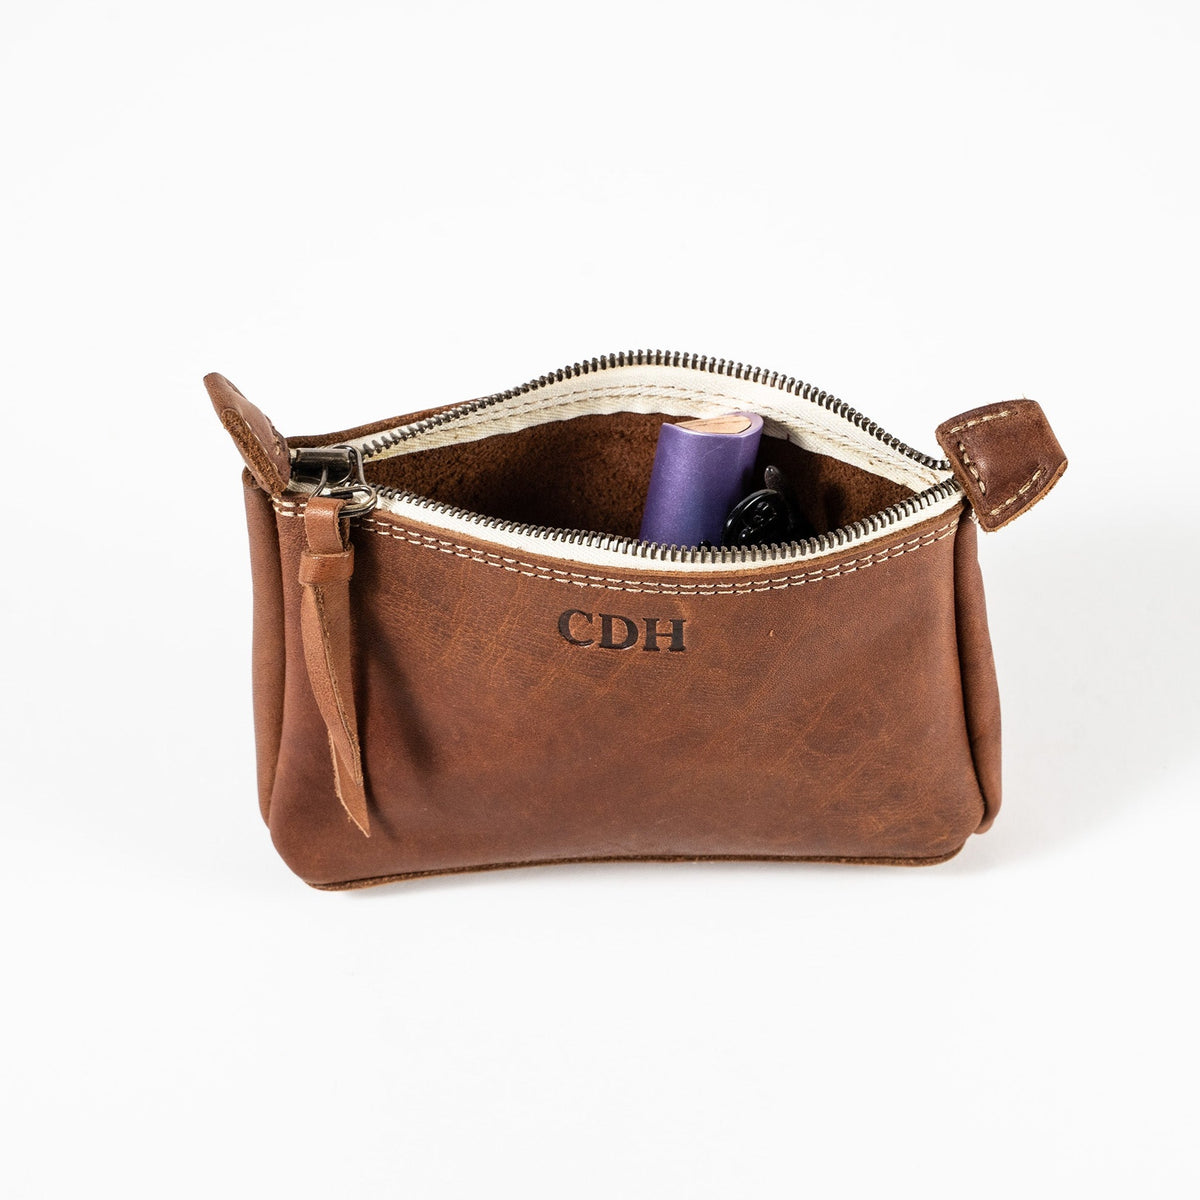 Women's Leather Monogrammed Cosmetic Bags | Leatherology